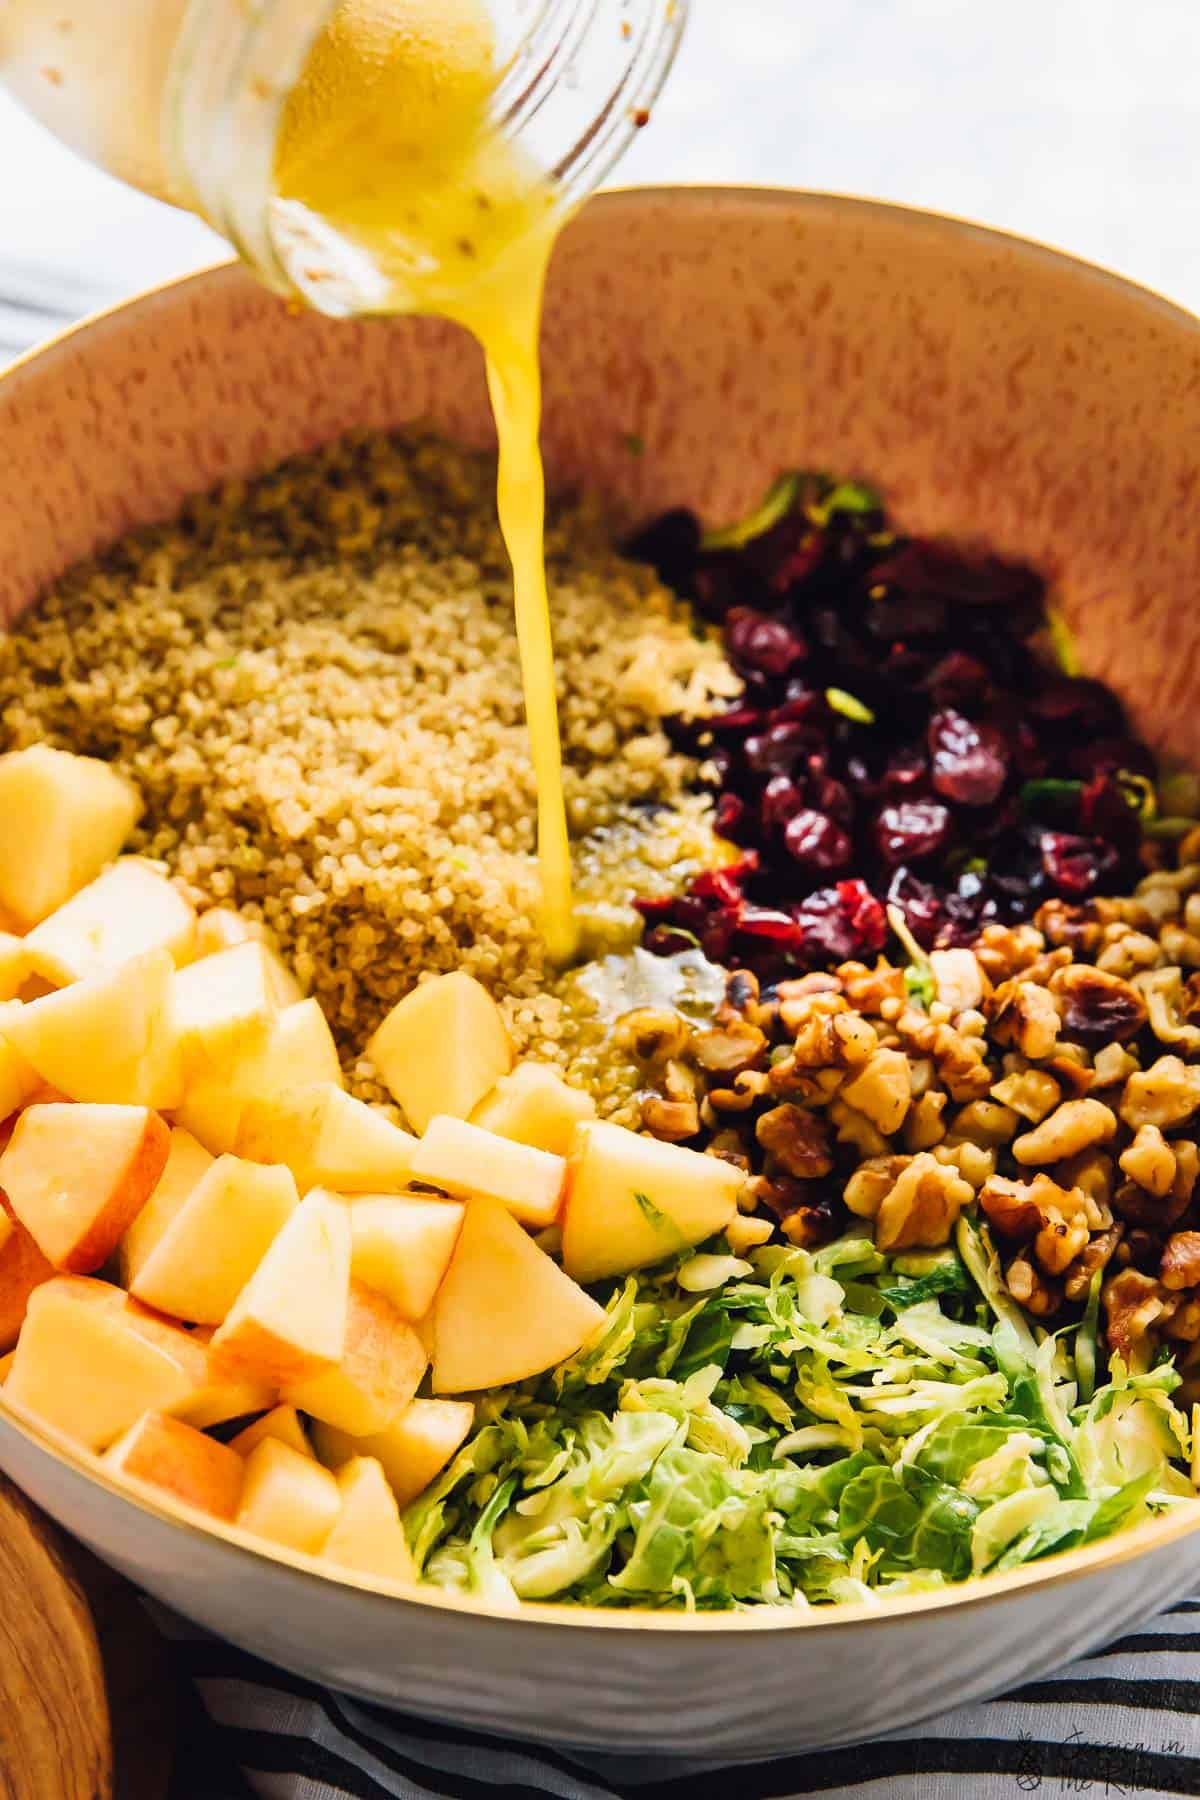 Vinaigrette being poured onto a quinoa and apple salad in a bowl.